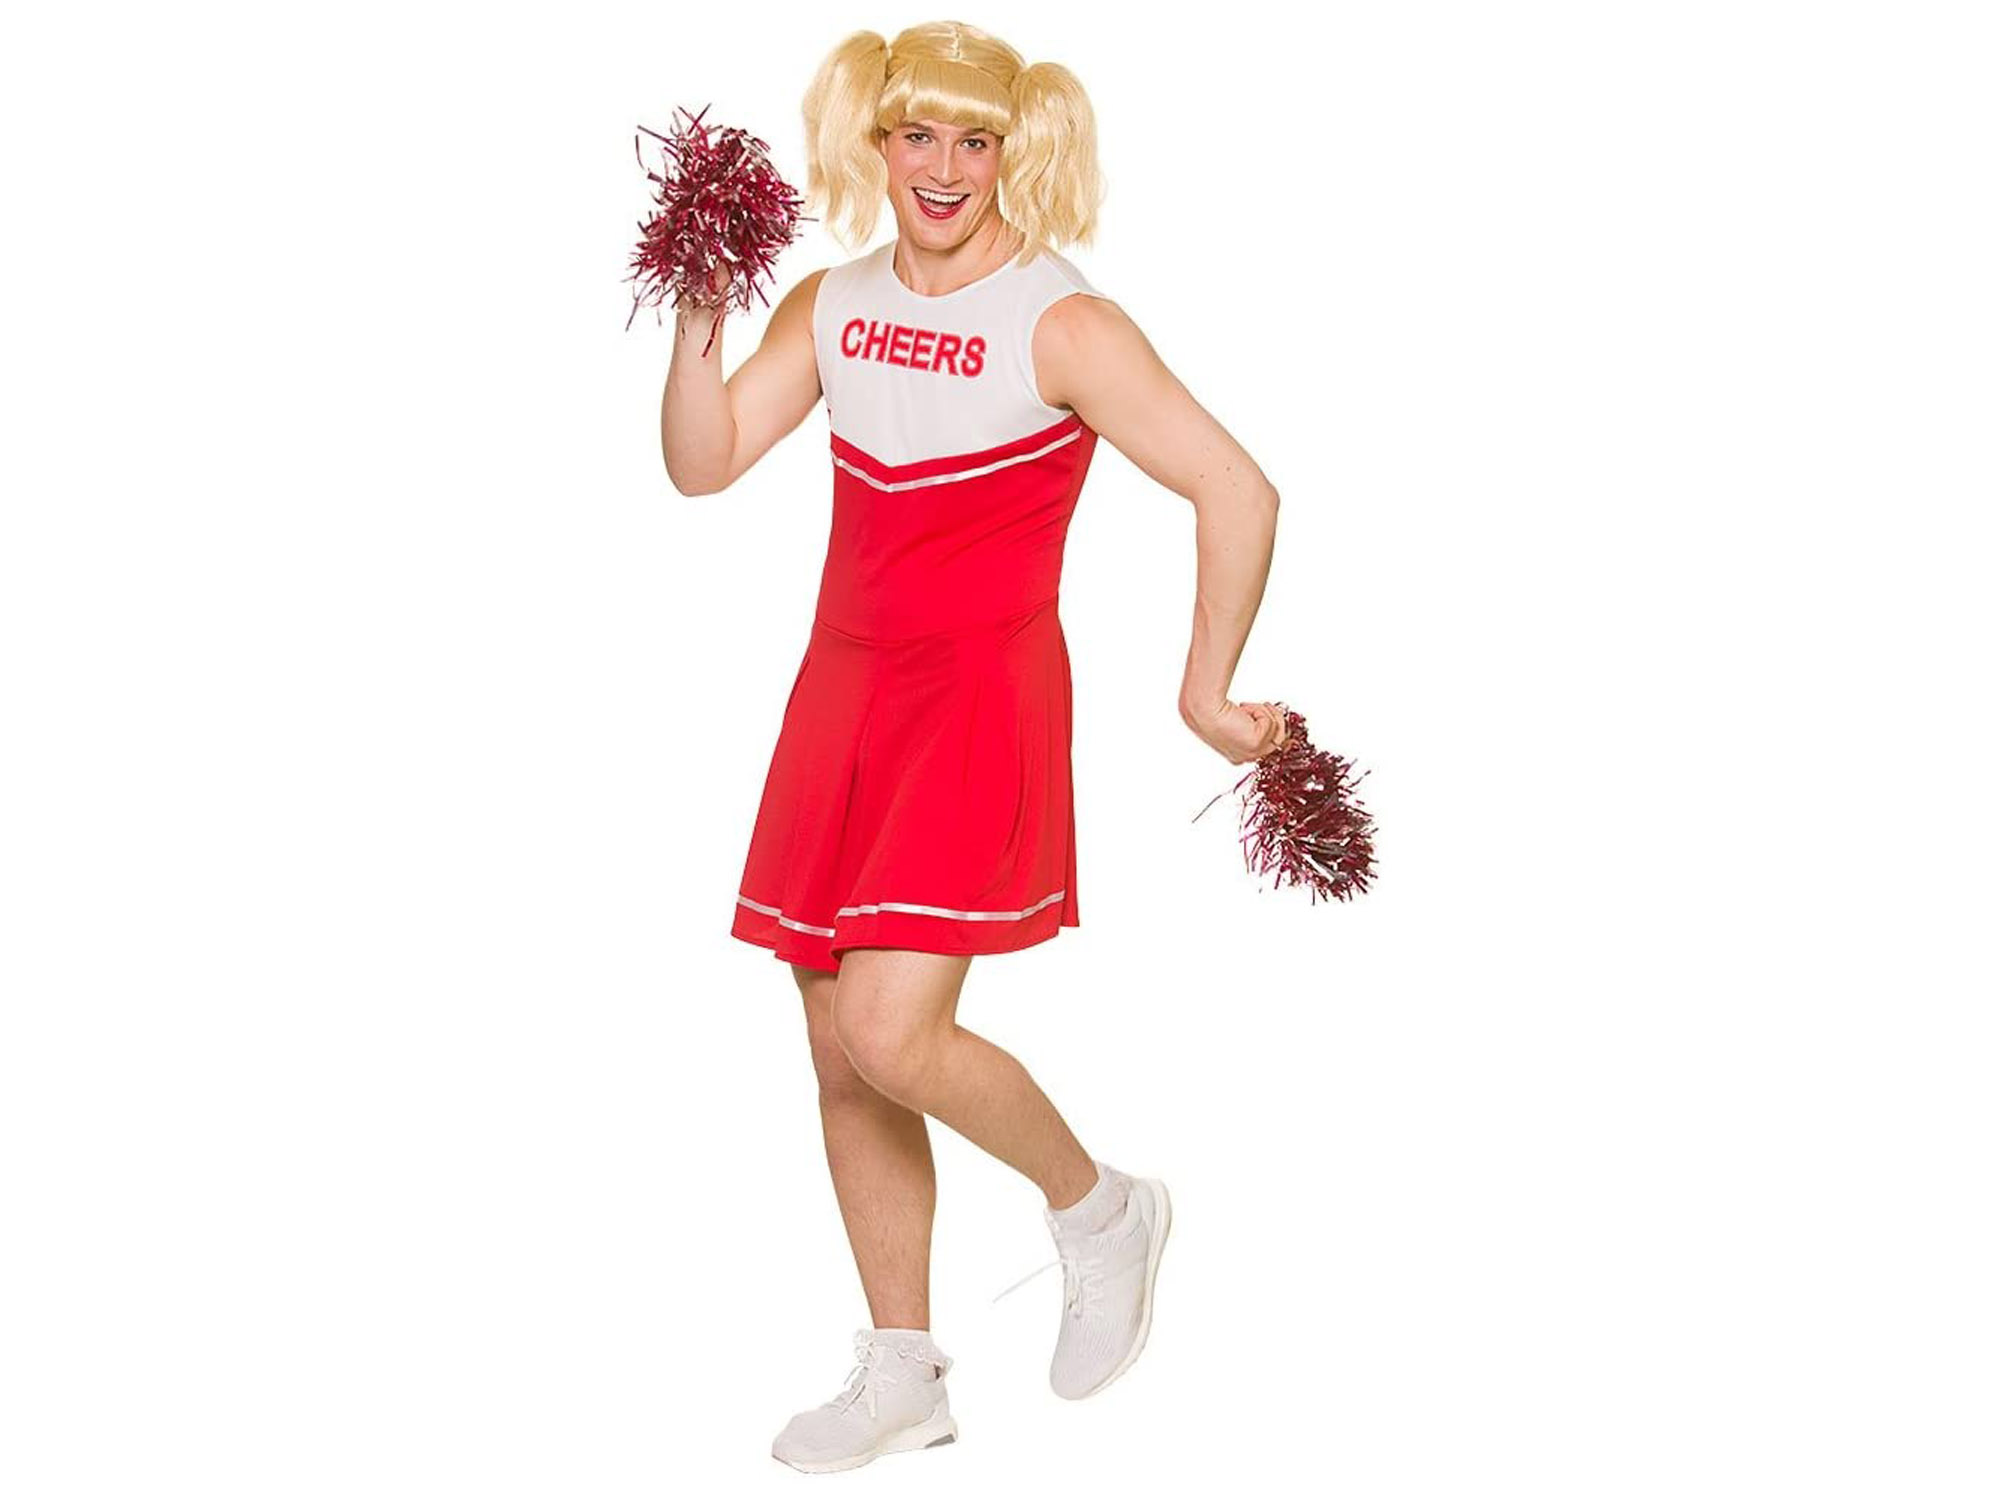 Novelty Red Hot Cheerleader Outfit - Amazon